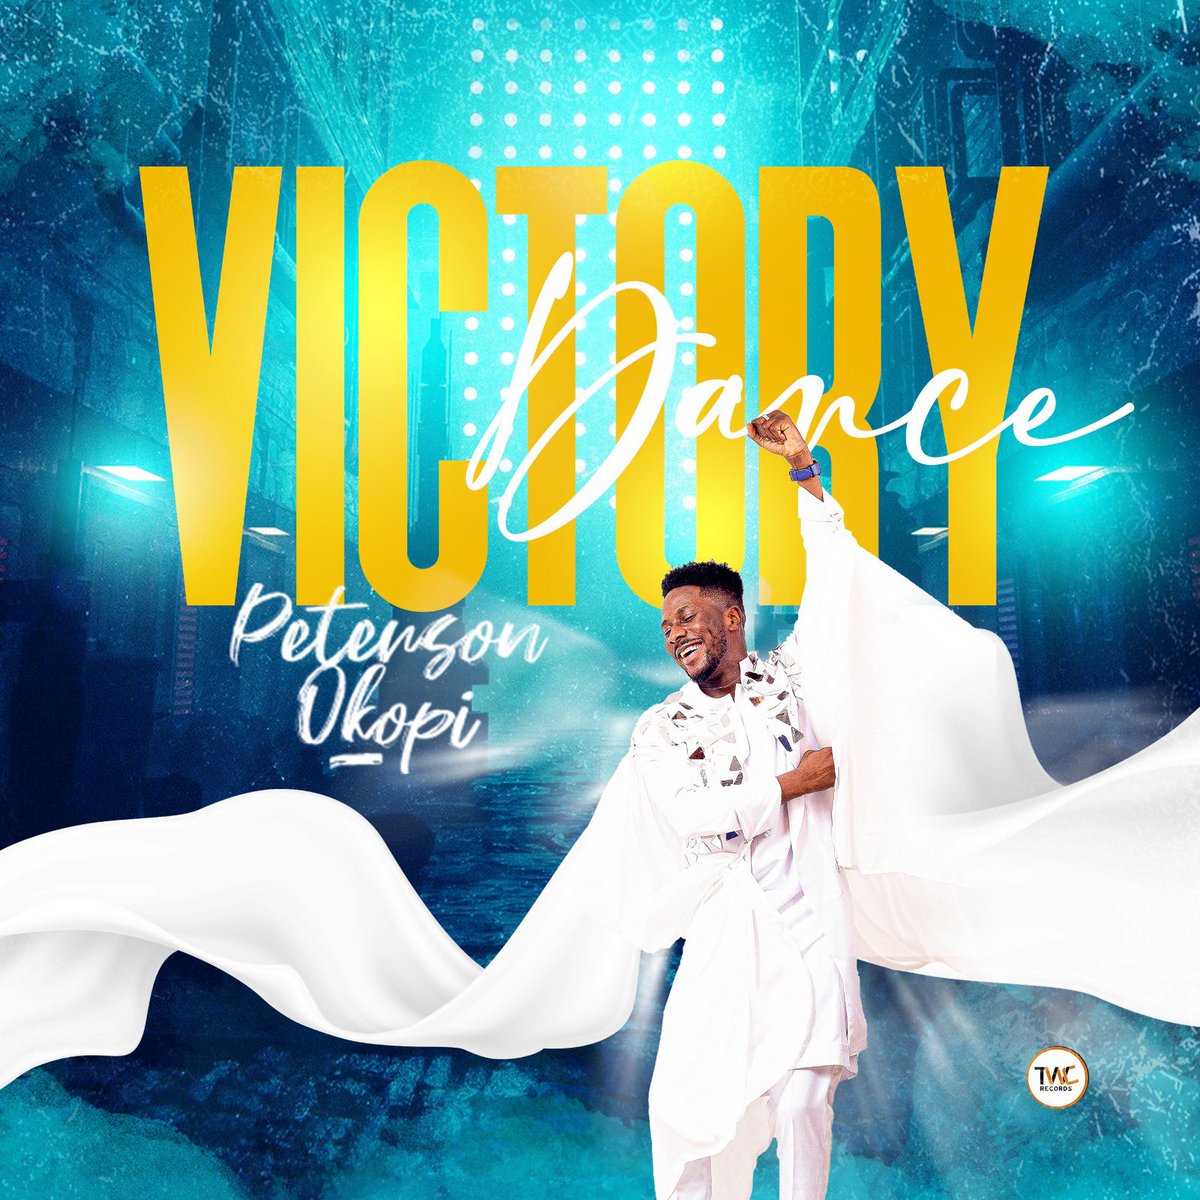 Since listening to @Okopi_Peterson “Victory Dance” my faith grew because God has never lost a battle so why should I fear👏🏽👏🏽👏🏽👏🏽Listen and watch #PetersonVictoryDance >> youtu.be/qFBSPmGrPFU